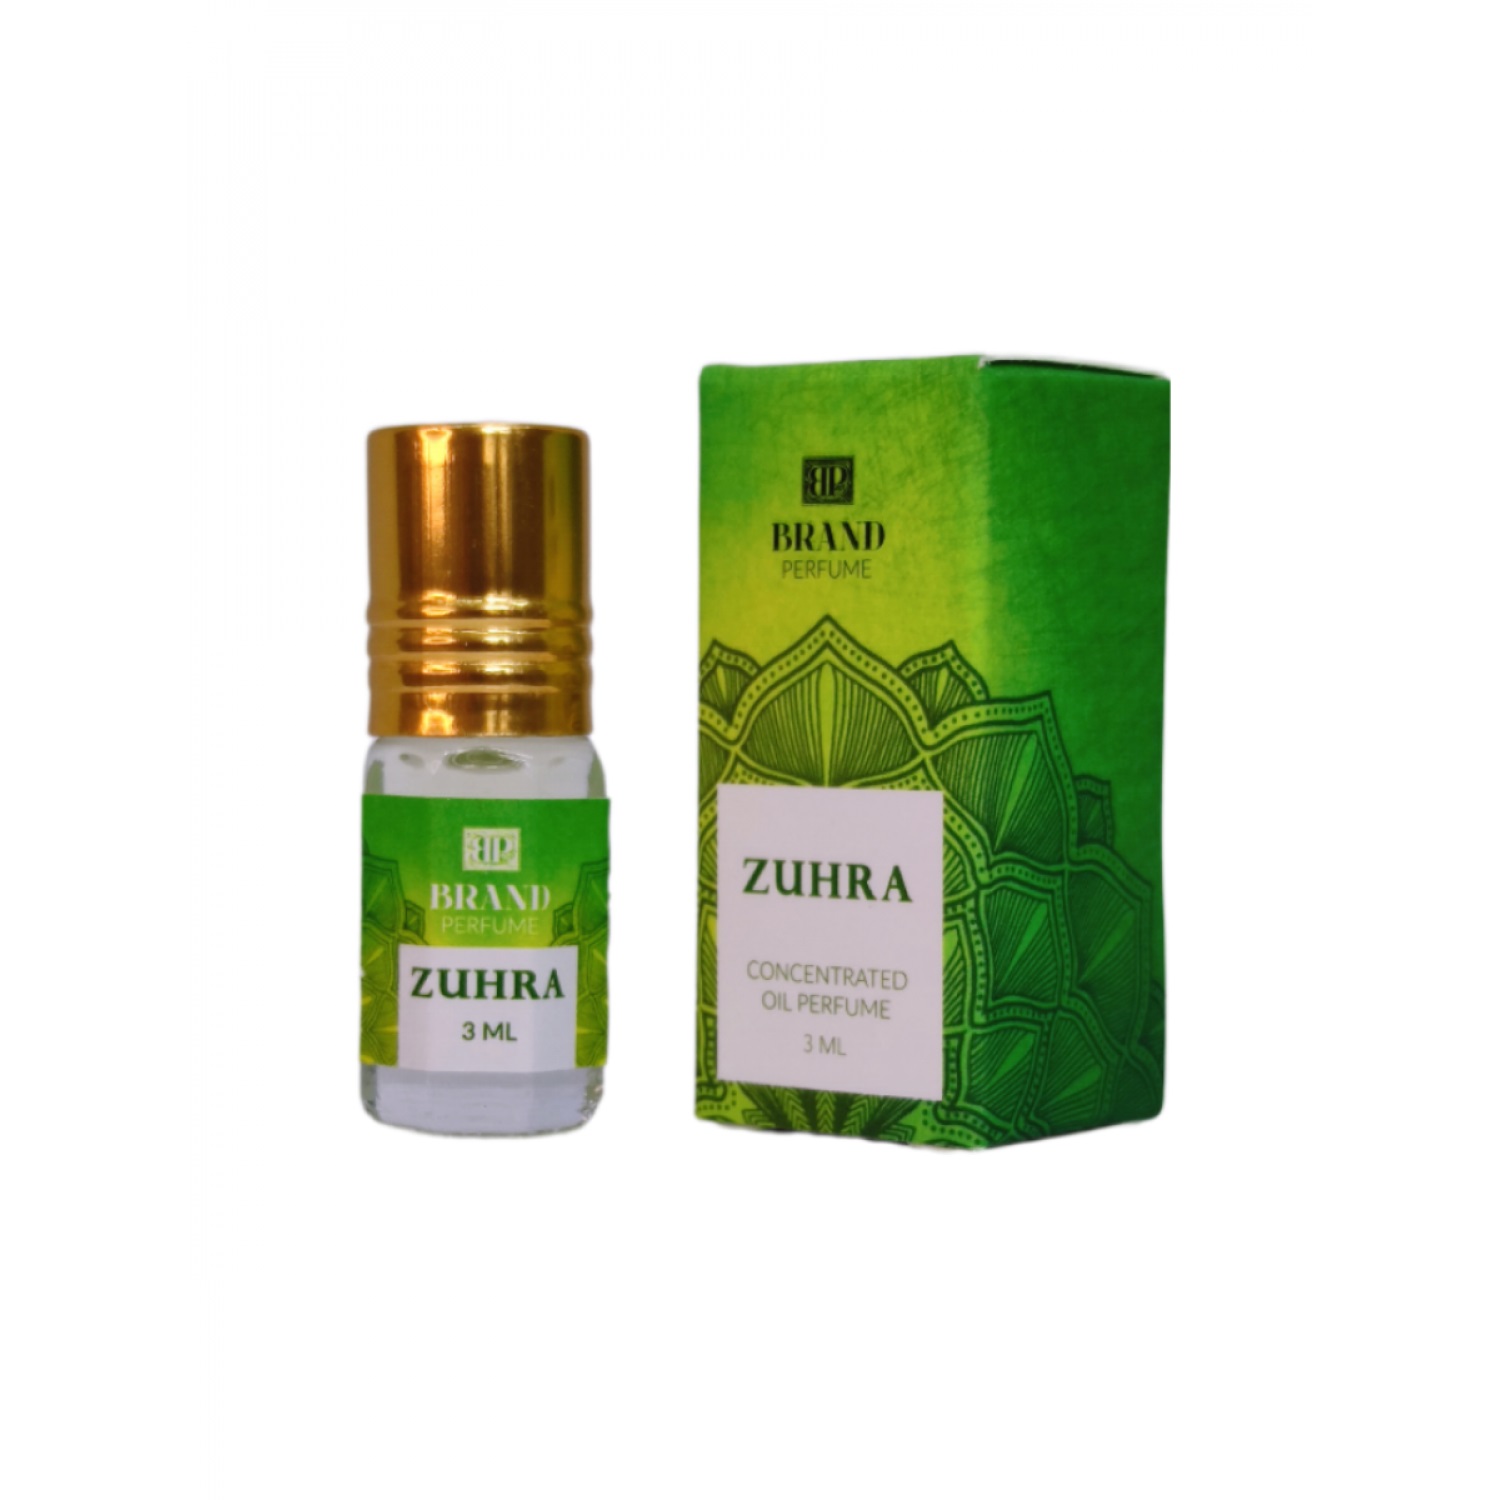 ZUHRA Concentrated Oil Perfume, Brand Perfume (Концентрированные масляные духи), ролик, 3 мл.